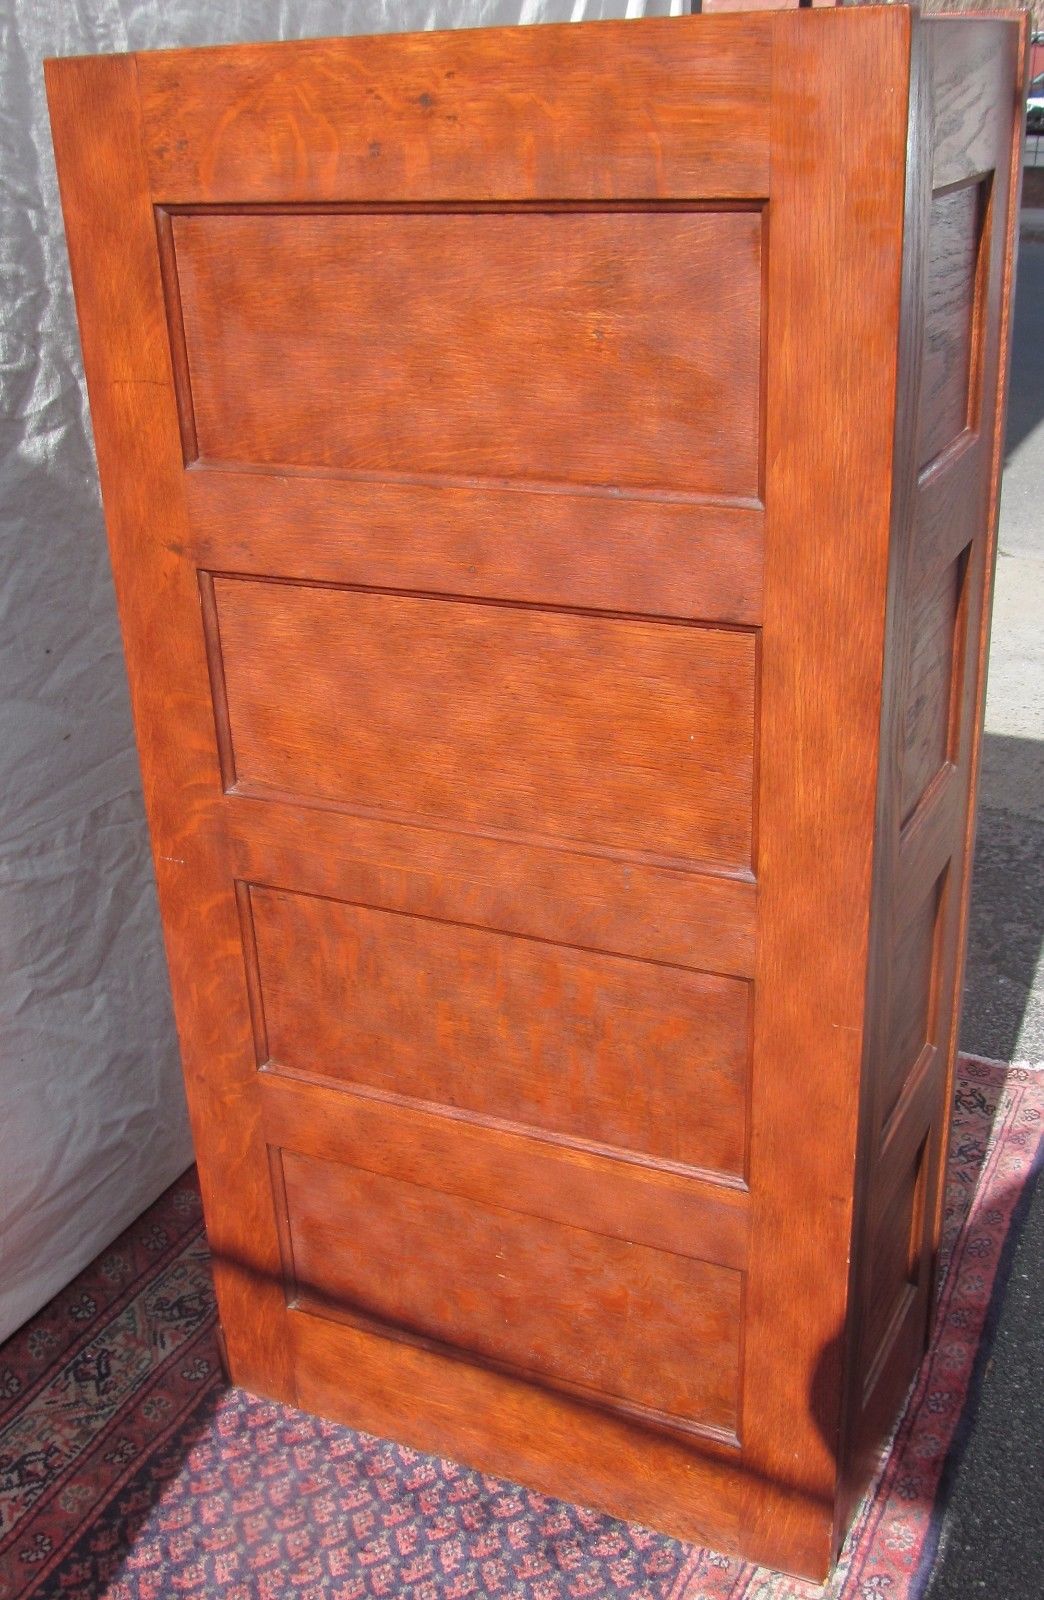 ANTIQUE ARTS & CRAFT OAK RAISED PANEL FILE CABINET WITH 4 OVER 3 DRAWER FORMAT